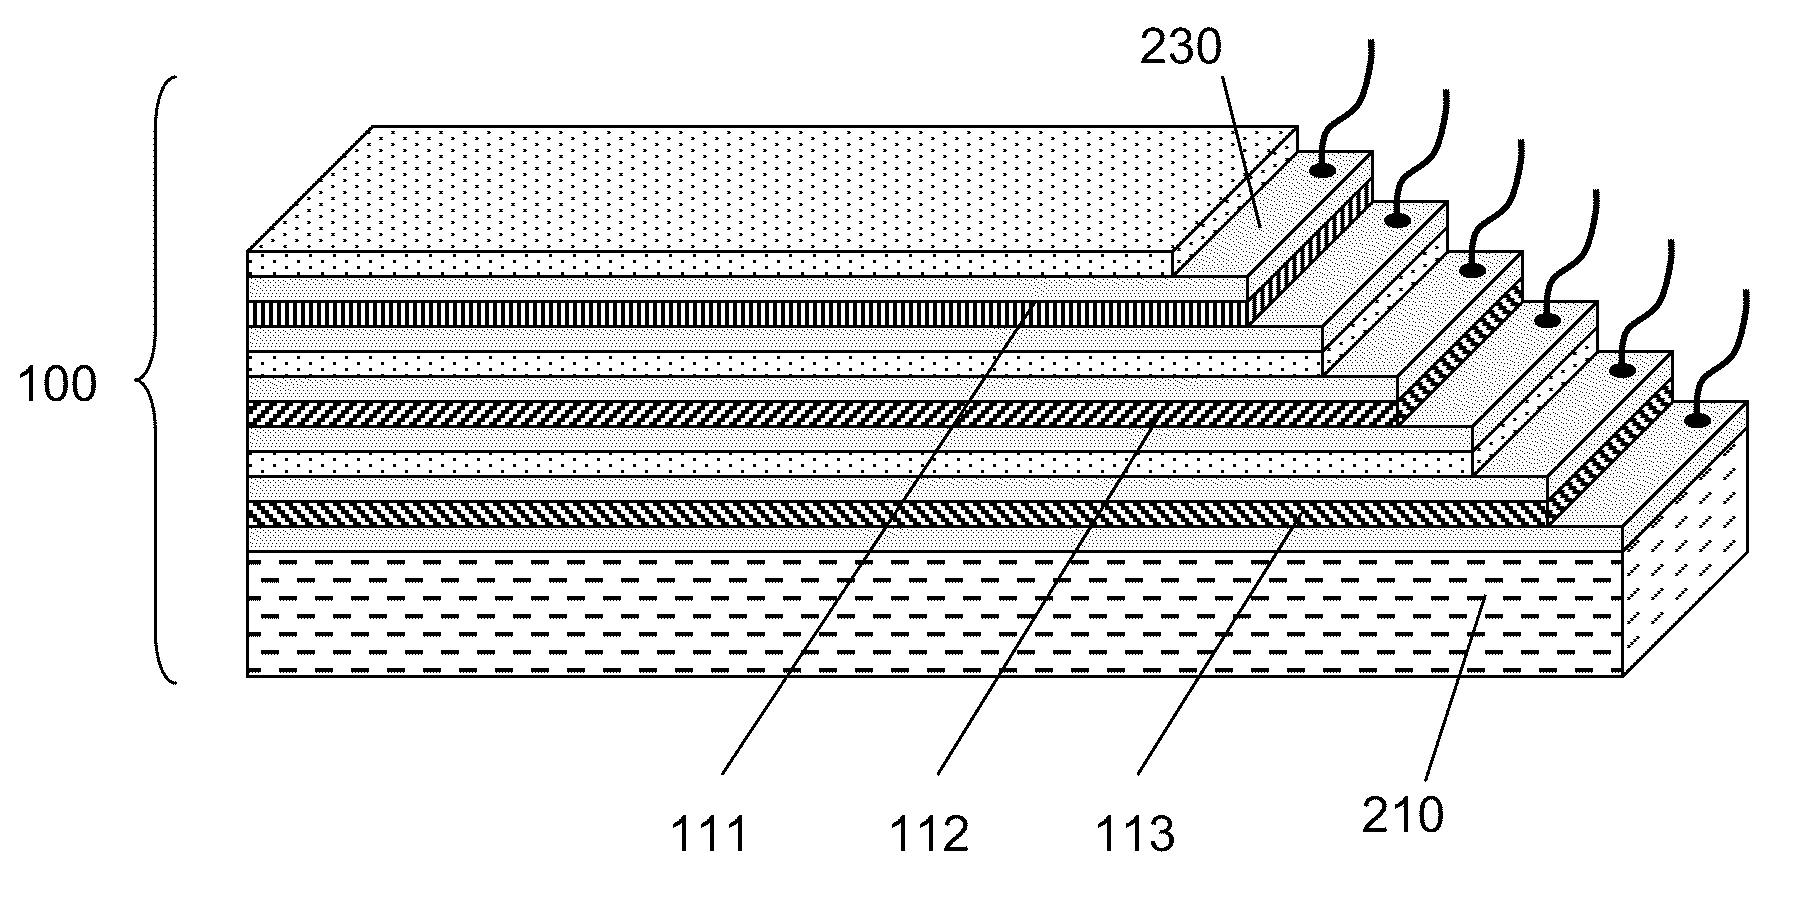 Multi-layered electro-optic devices